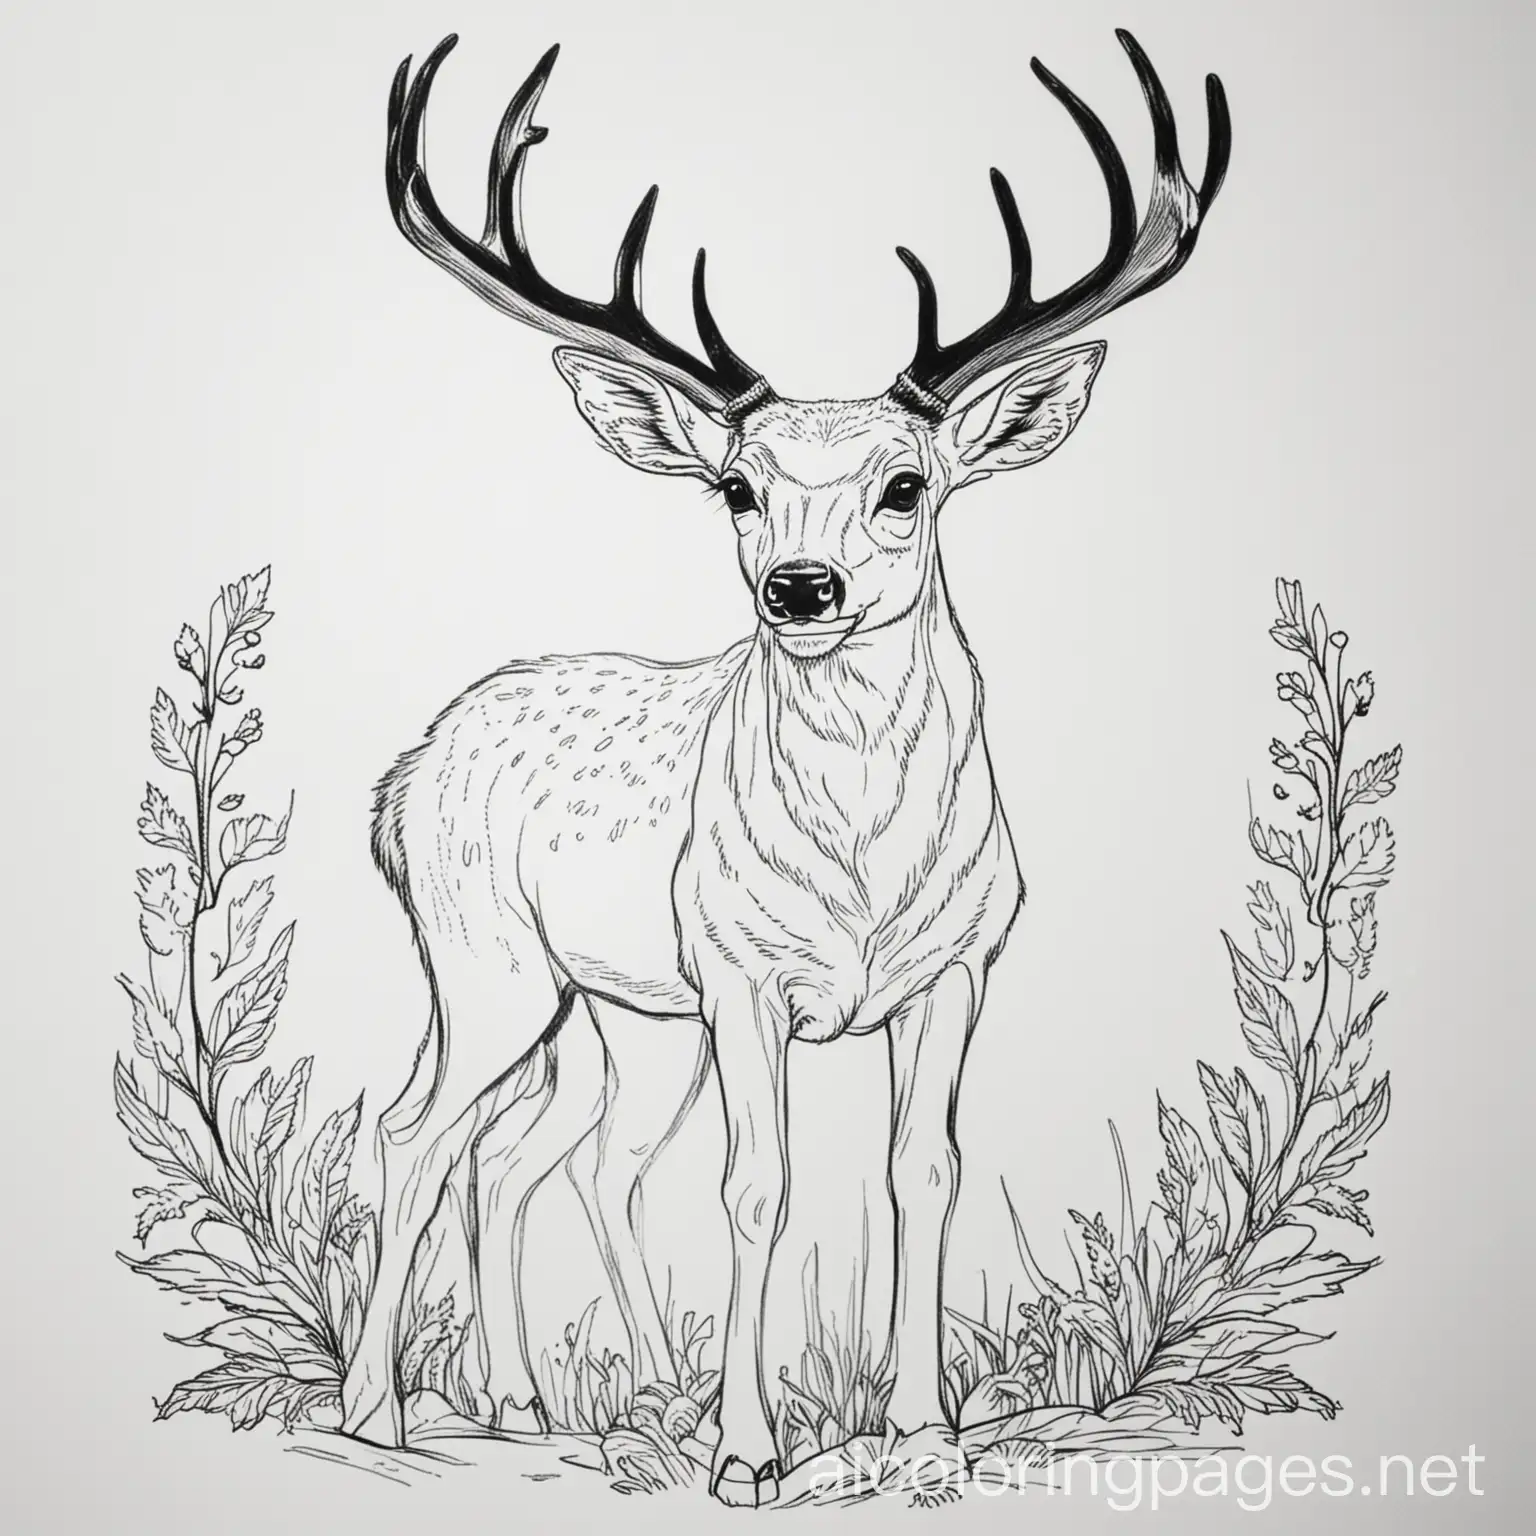 deer coloung page white background, black outline ,inner white
, Coloring Page, black and white, line art, white background, Simplicity, Ample White Space. The background of the coloring page is plain white to make it easy for young children to color within the lines. The outlines of all the subjects are easy to distinguish, making it simple for kids to color without too much difficulty